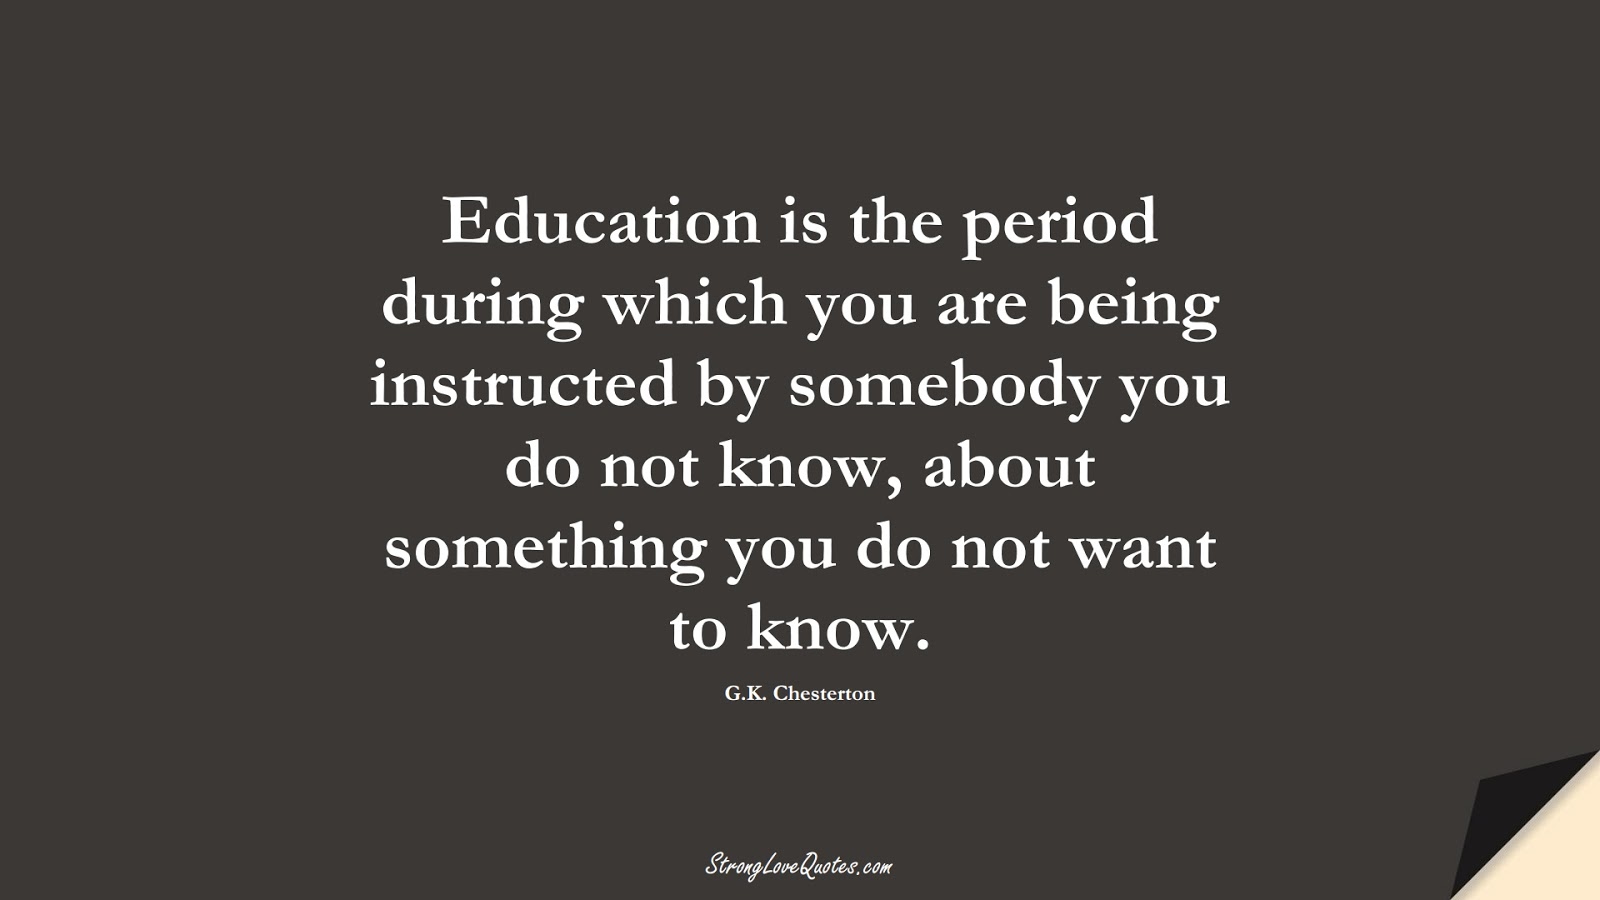 Education is the period during which you are being instructed by somebody you do not know, about something you do not want to know. (G.K. Chesterton);  #EducationQuotes